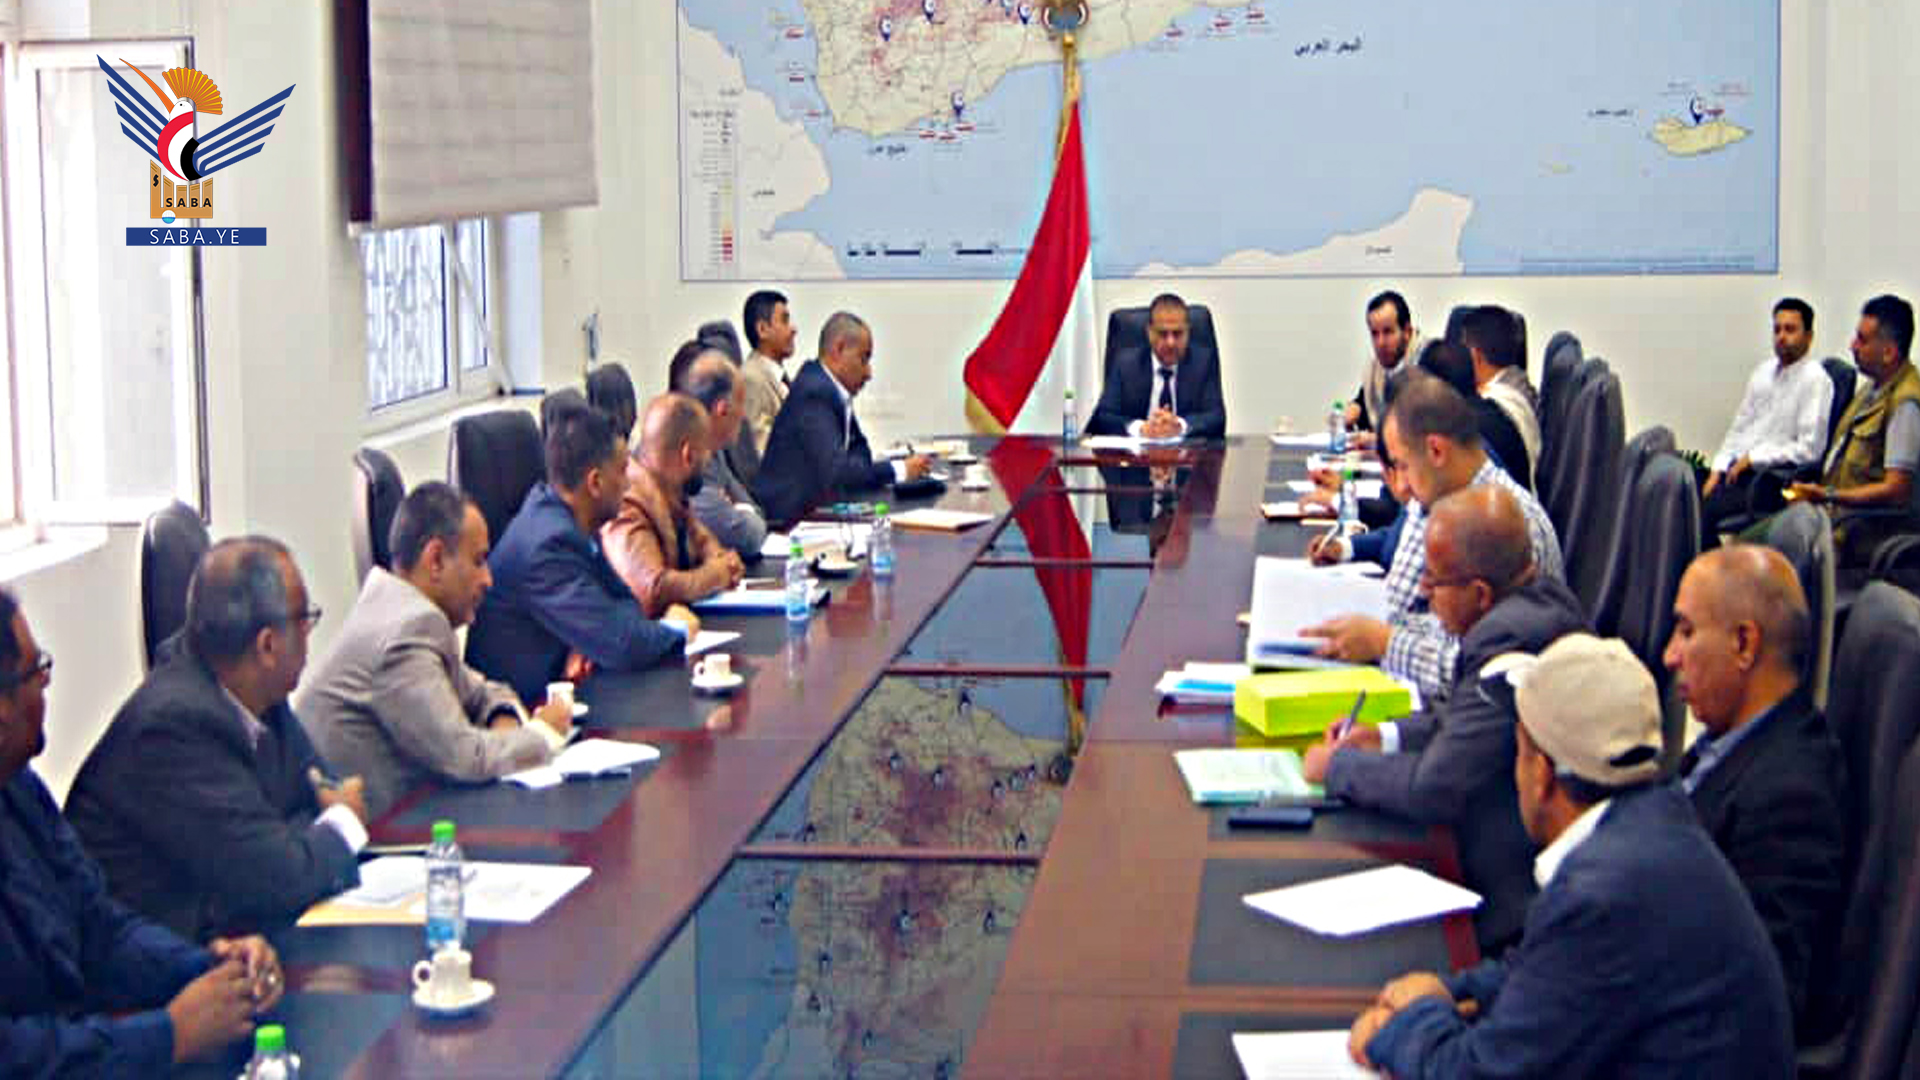 Yemeni Red Sea Ports Corporation projects discussed